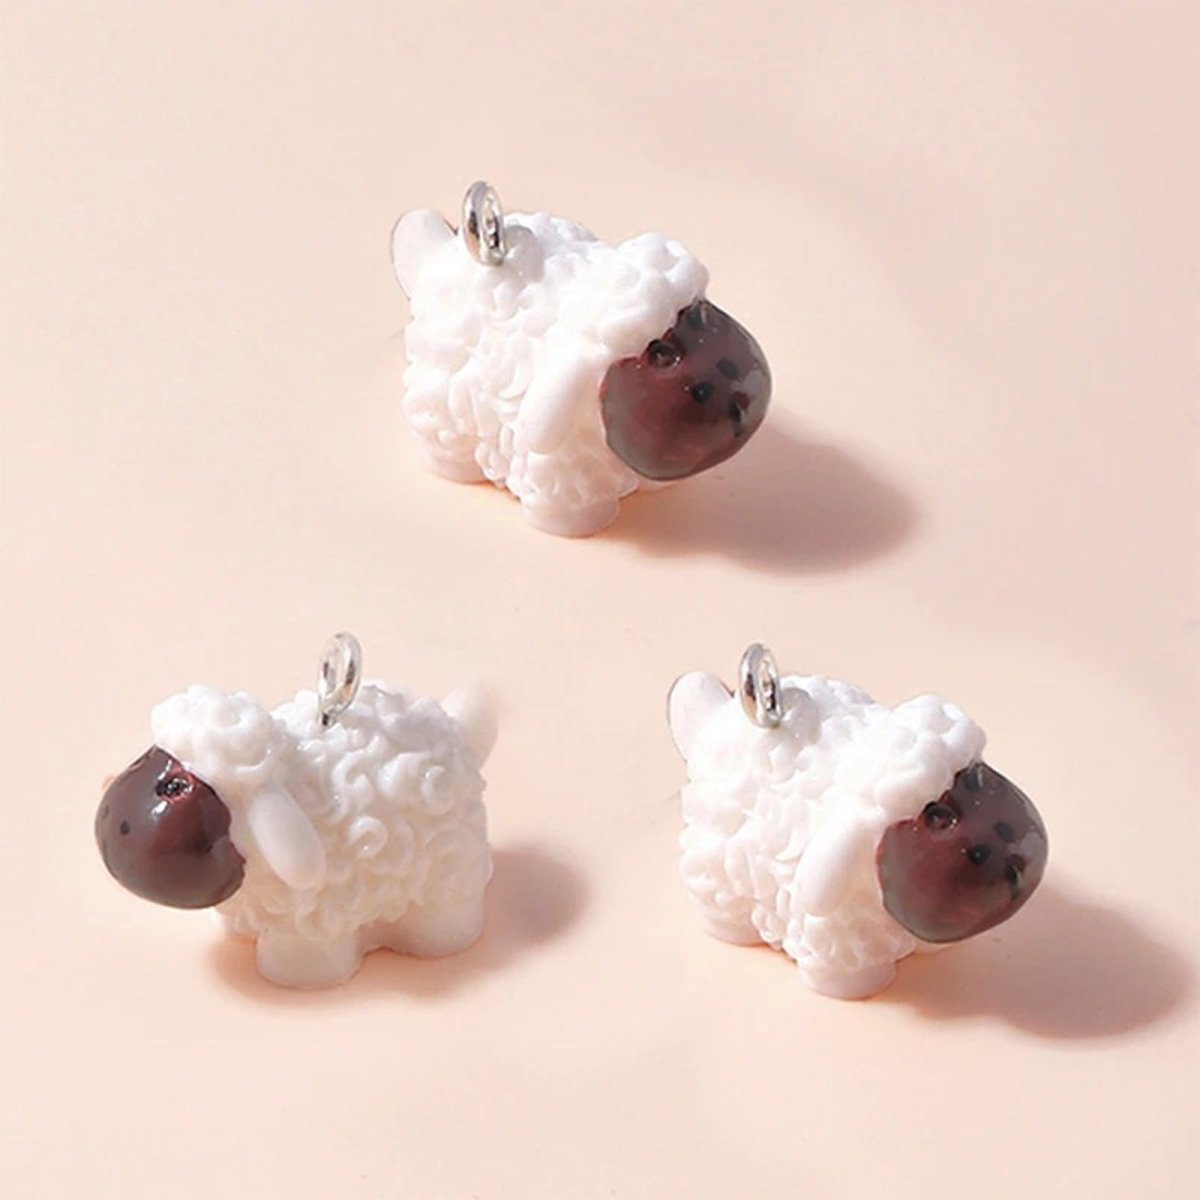 10pcs Miniature Mini Garden Animal Figurines Charms with Loop Pendant Craft - Sheep - Asia Sell